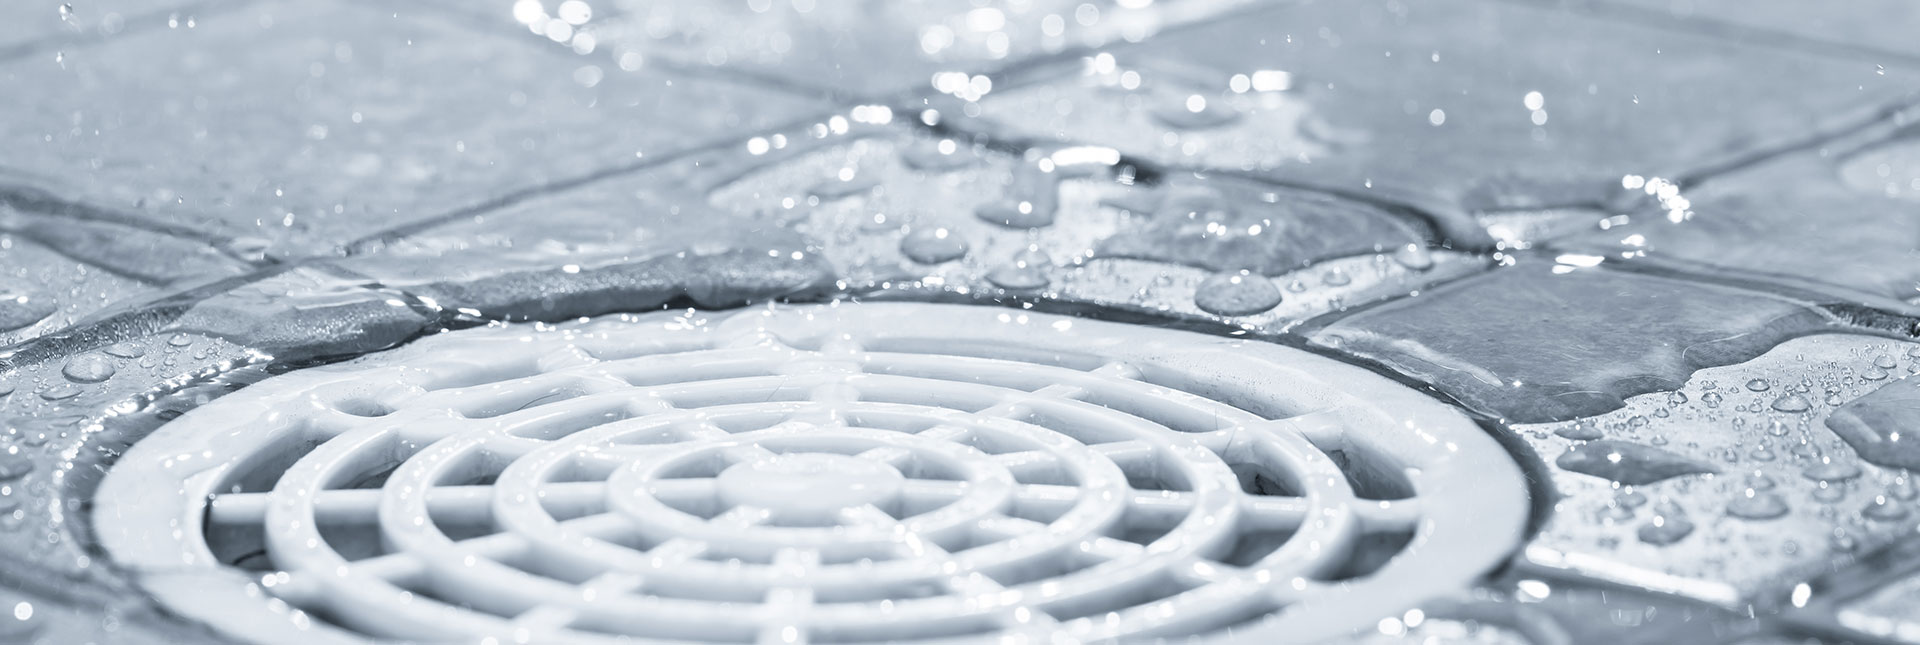 Tired of a Clogged Drain? These Tips are for You!